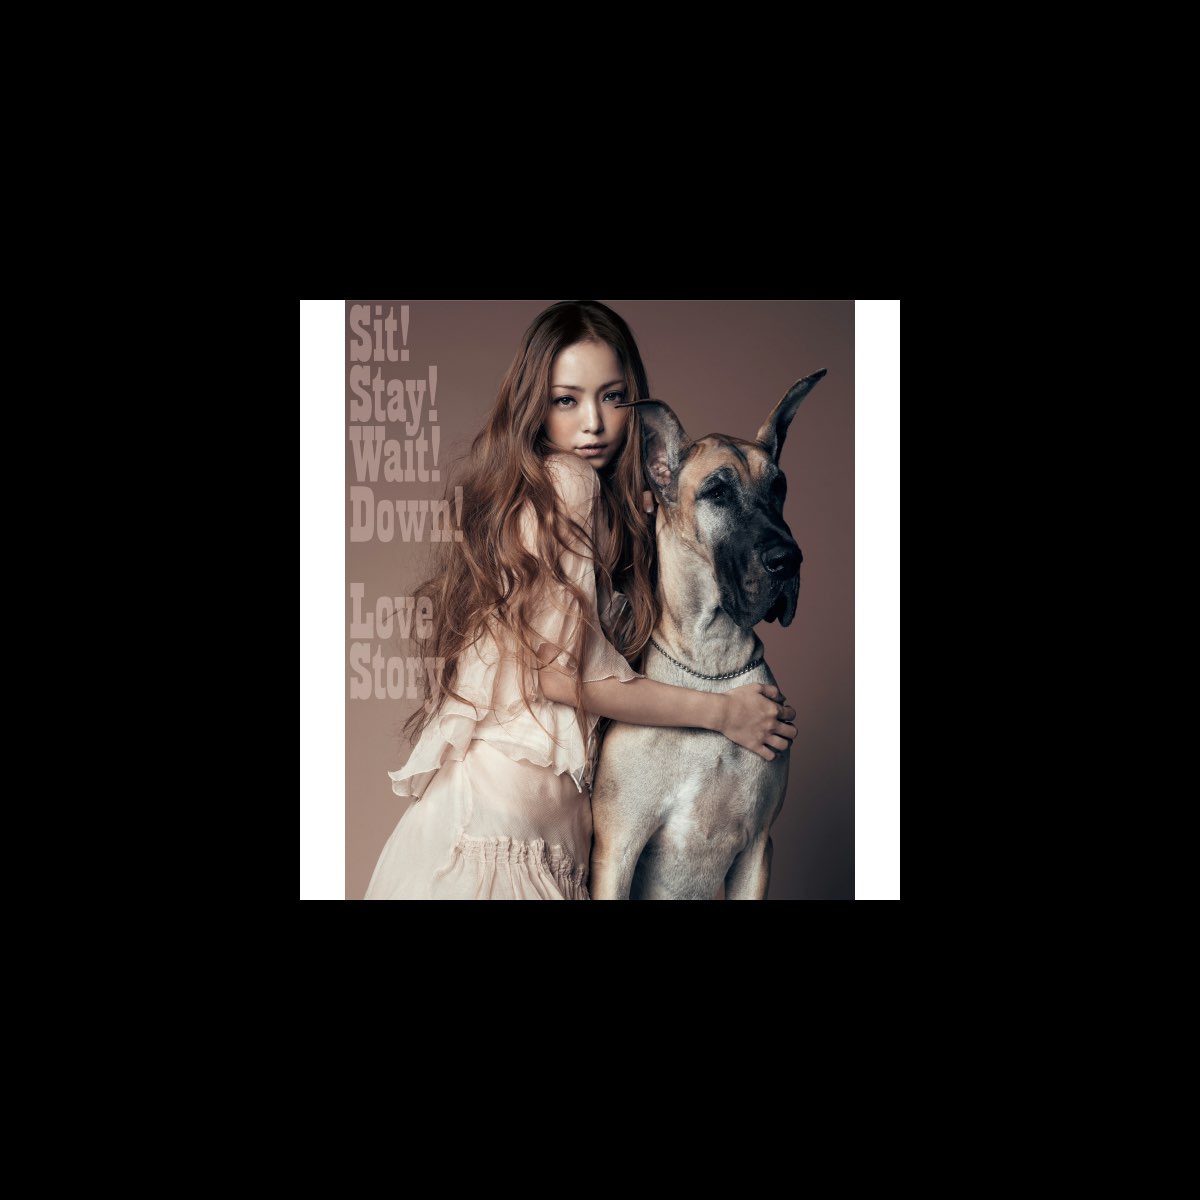 Sit Stay Wait Down Love Story Single By Namie Amuro On Apple Music